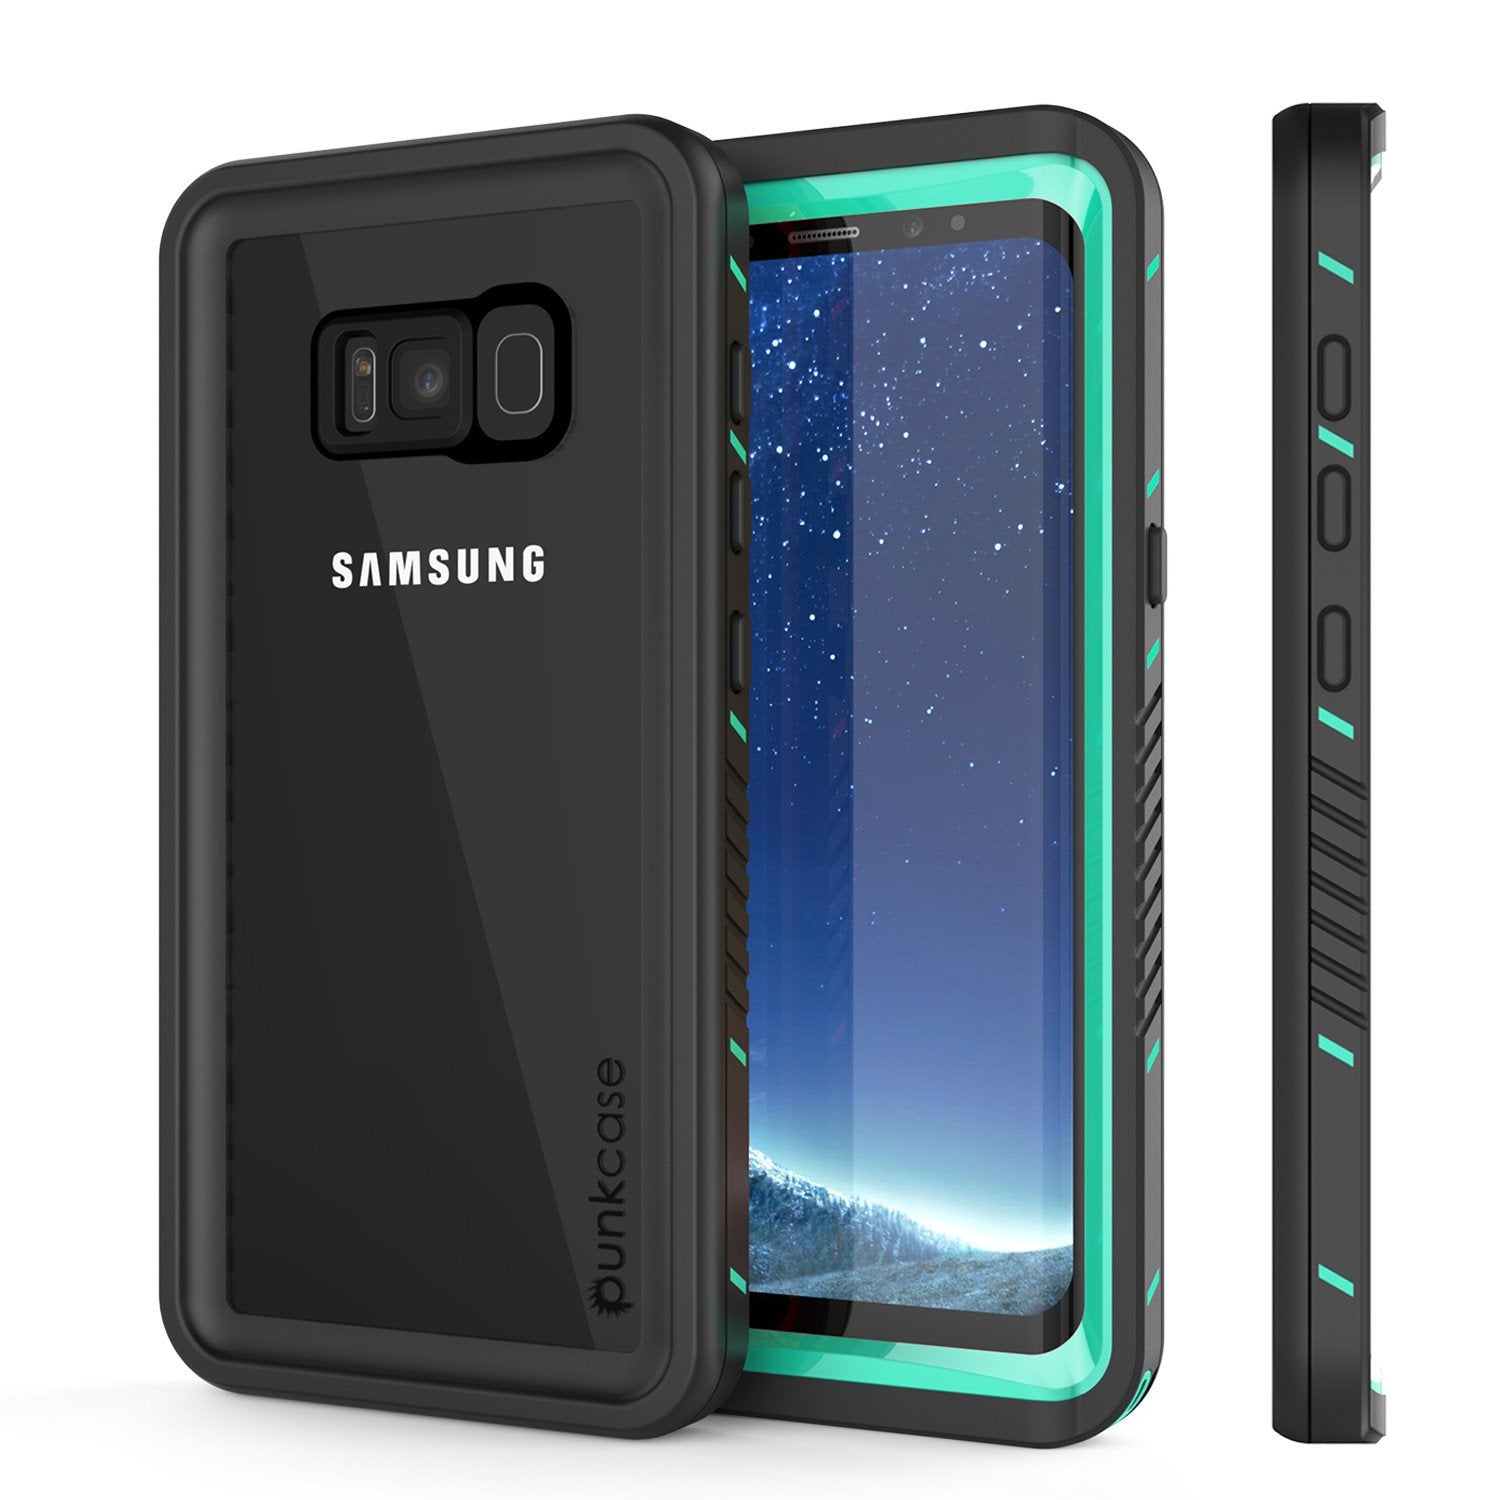 Galaxy S8 PLUS Waterproof Case, Punkcase [Extreme Series] Slim Fit, Armor Cover W/ Built In Screen Protector for Samsung Galaxy S8+ [Teal]